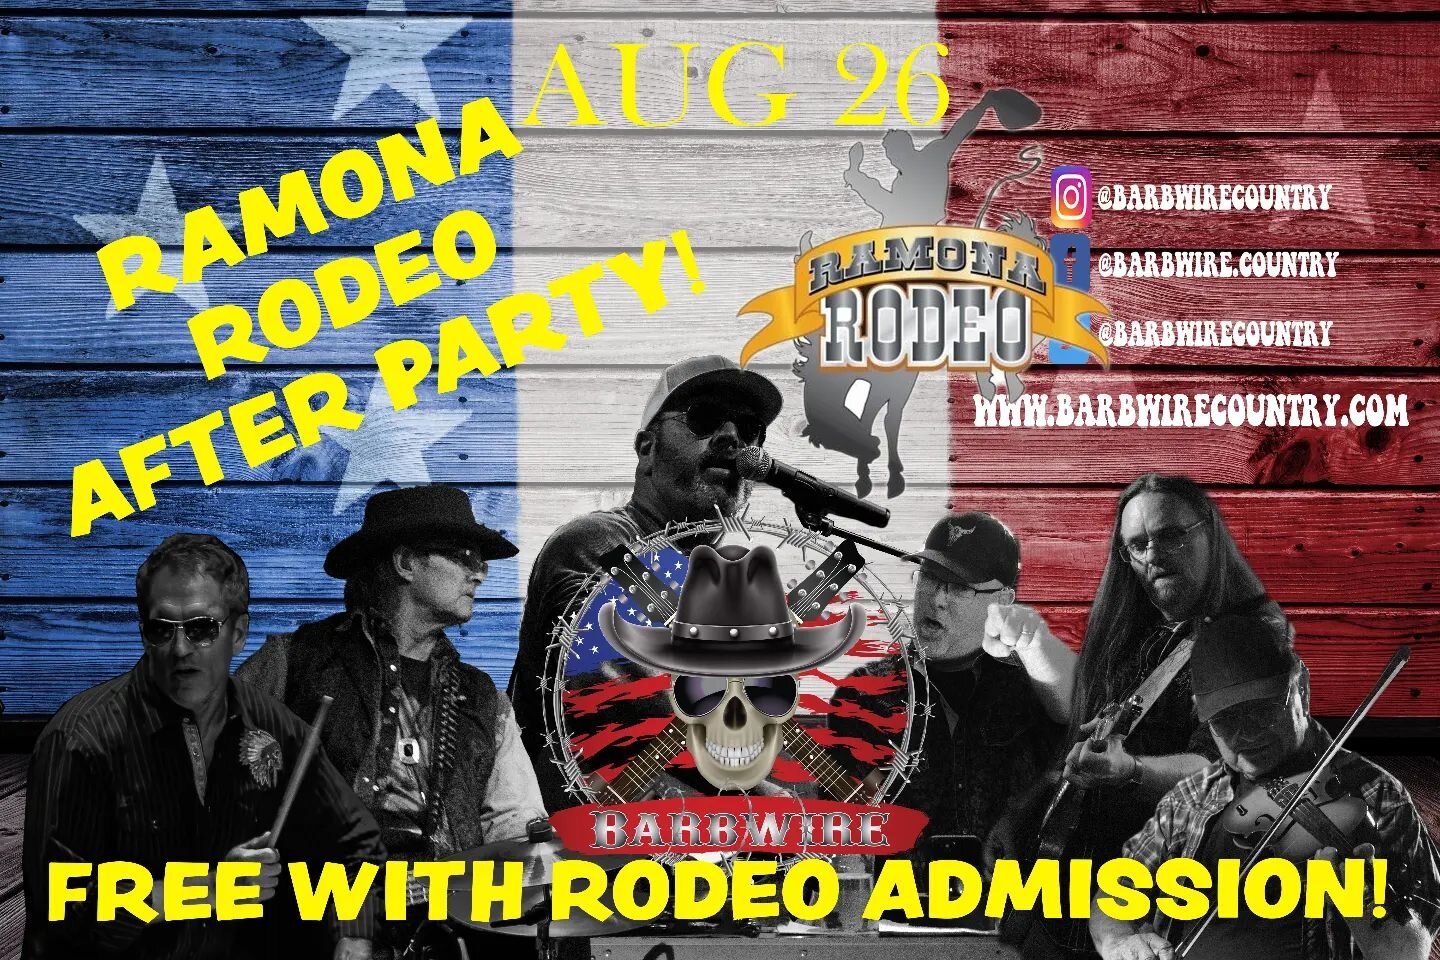 @theramonarodeo Friday! Come cheer on the cowboys then scoot your boots! 
.
.
#rodeolife #countrymusicartist #countrydance #cowboyup #ramona